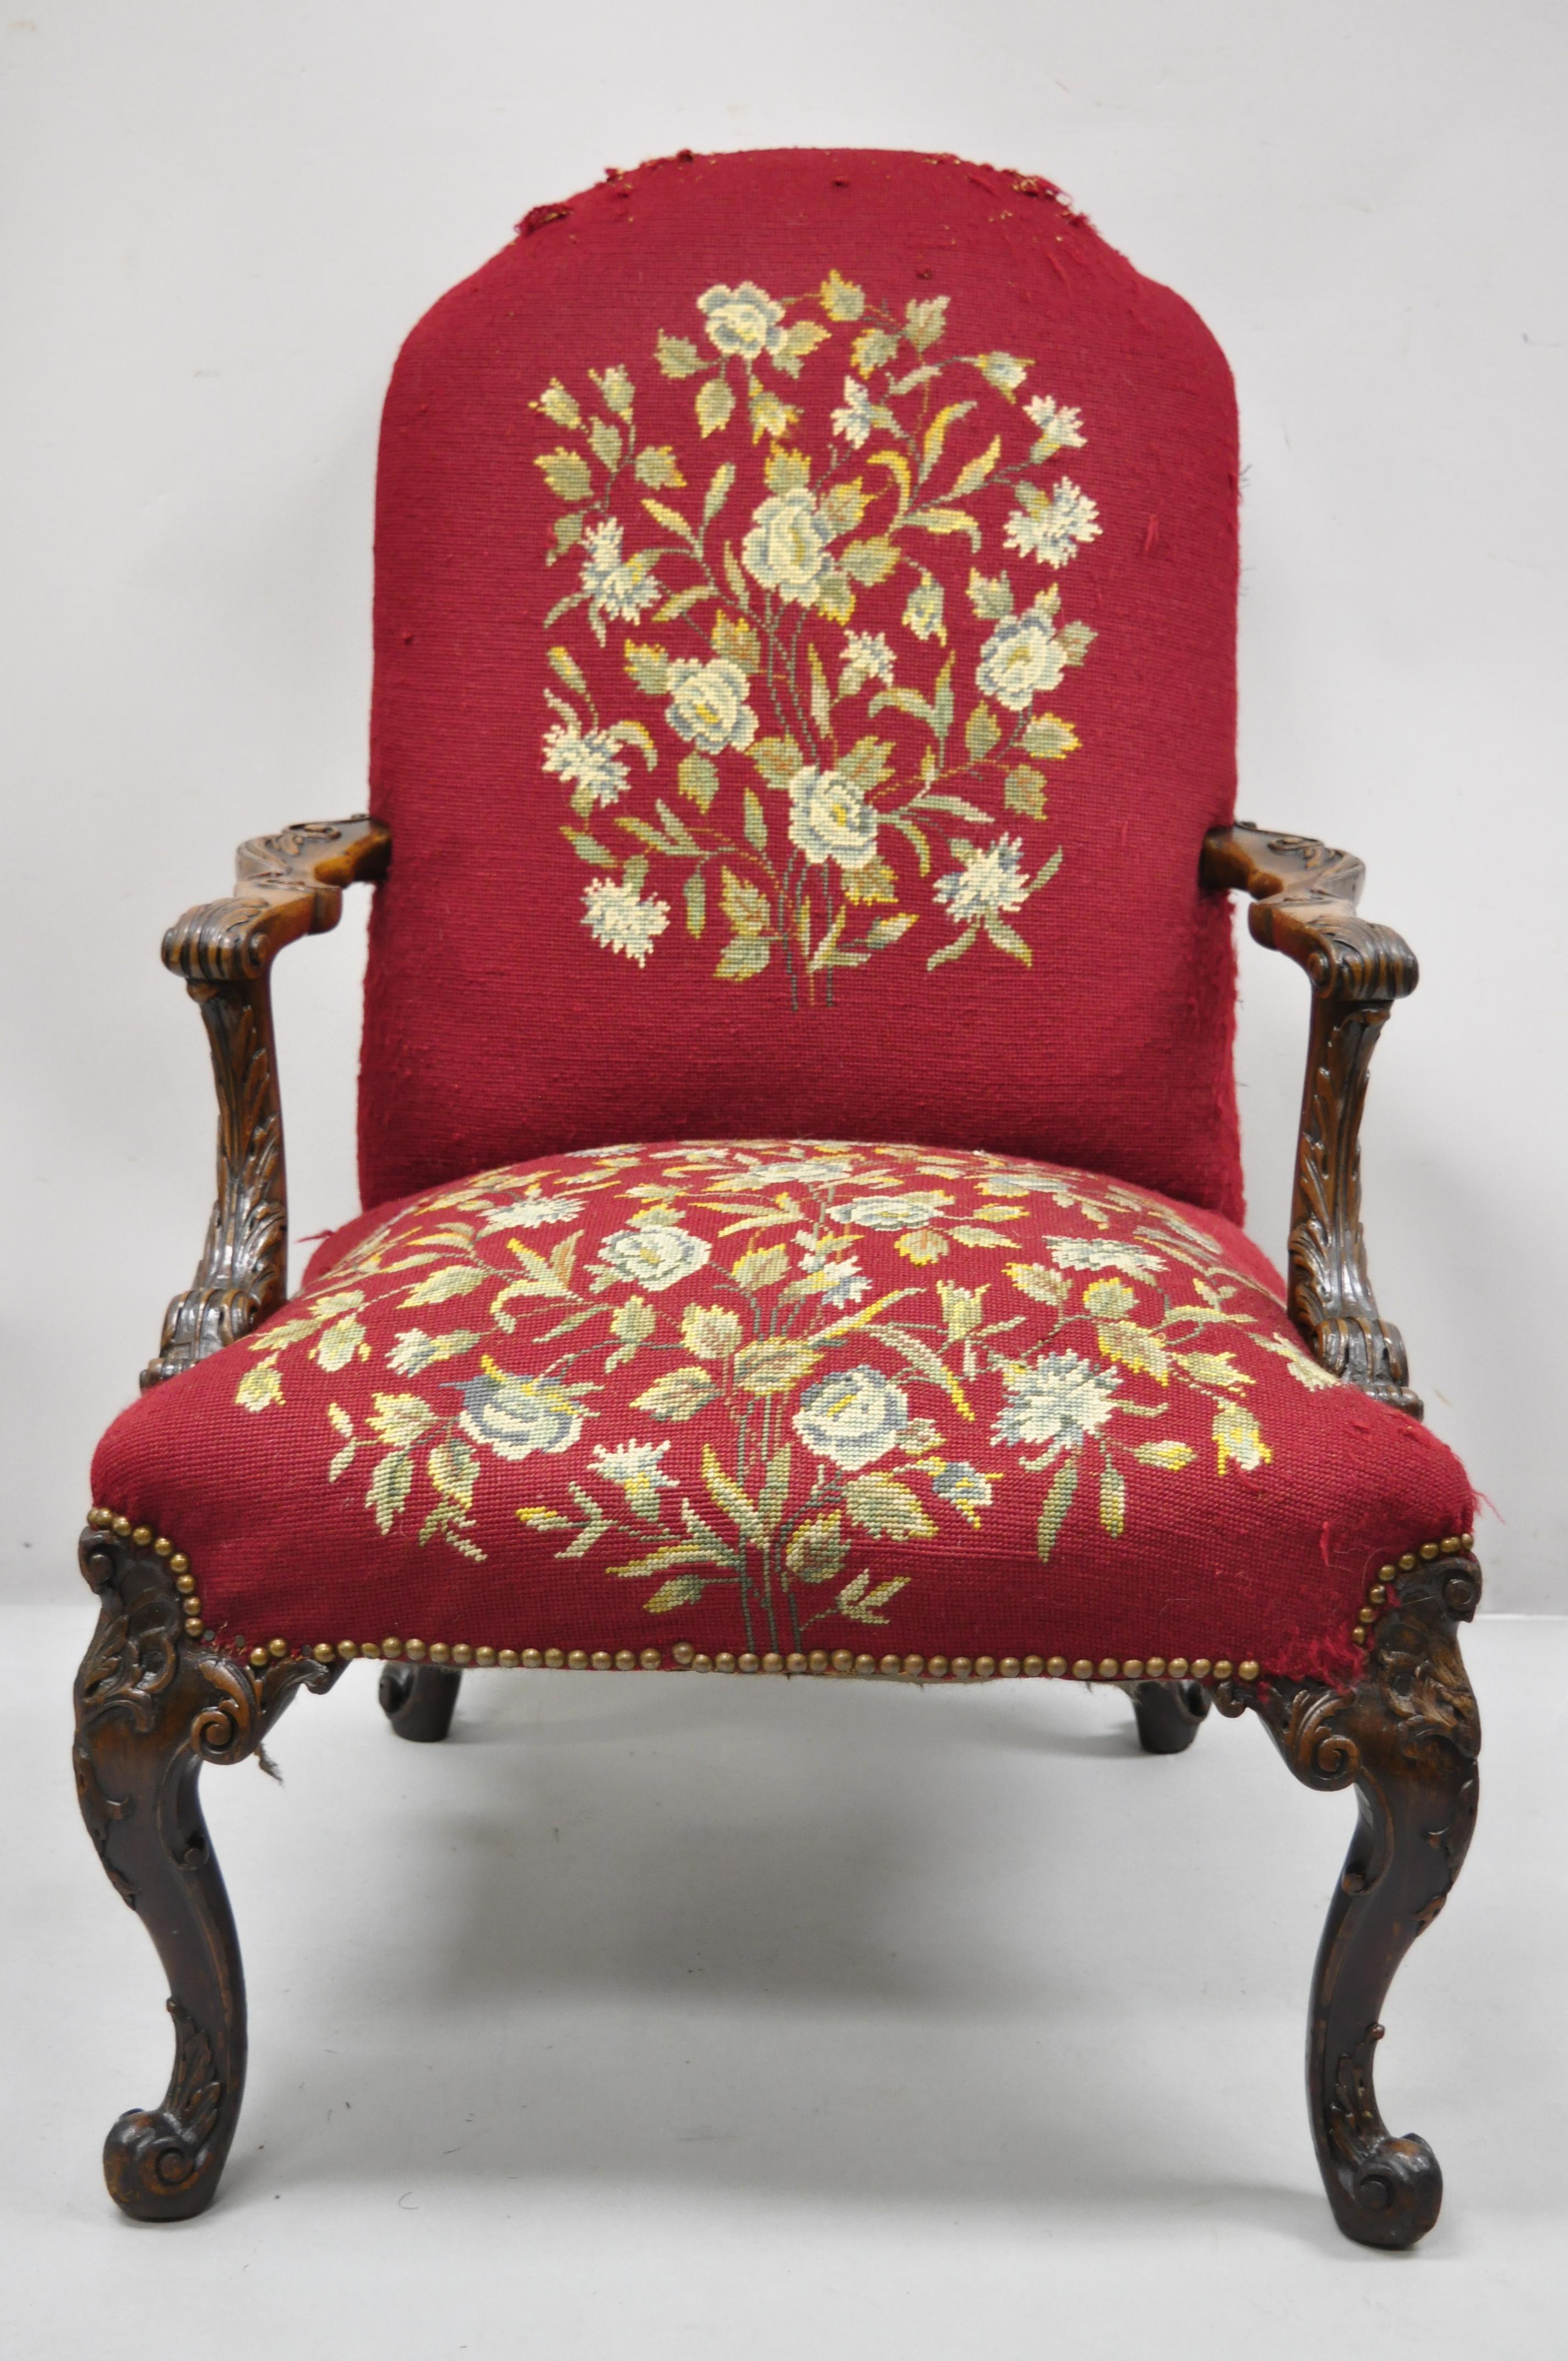 Antique Georgian floral needlepoint carved mahogany fireside lounge arm chair. Item features red floral needlepoint upholstery, solid wood frame, nicely carved details, cabriole legs, very nice antique item, quality craftsmanship, great style and